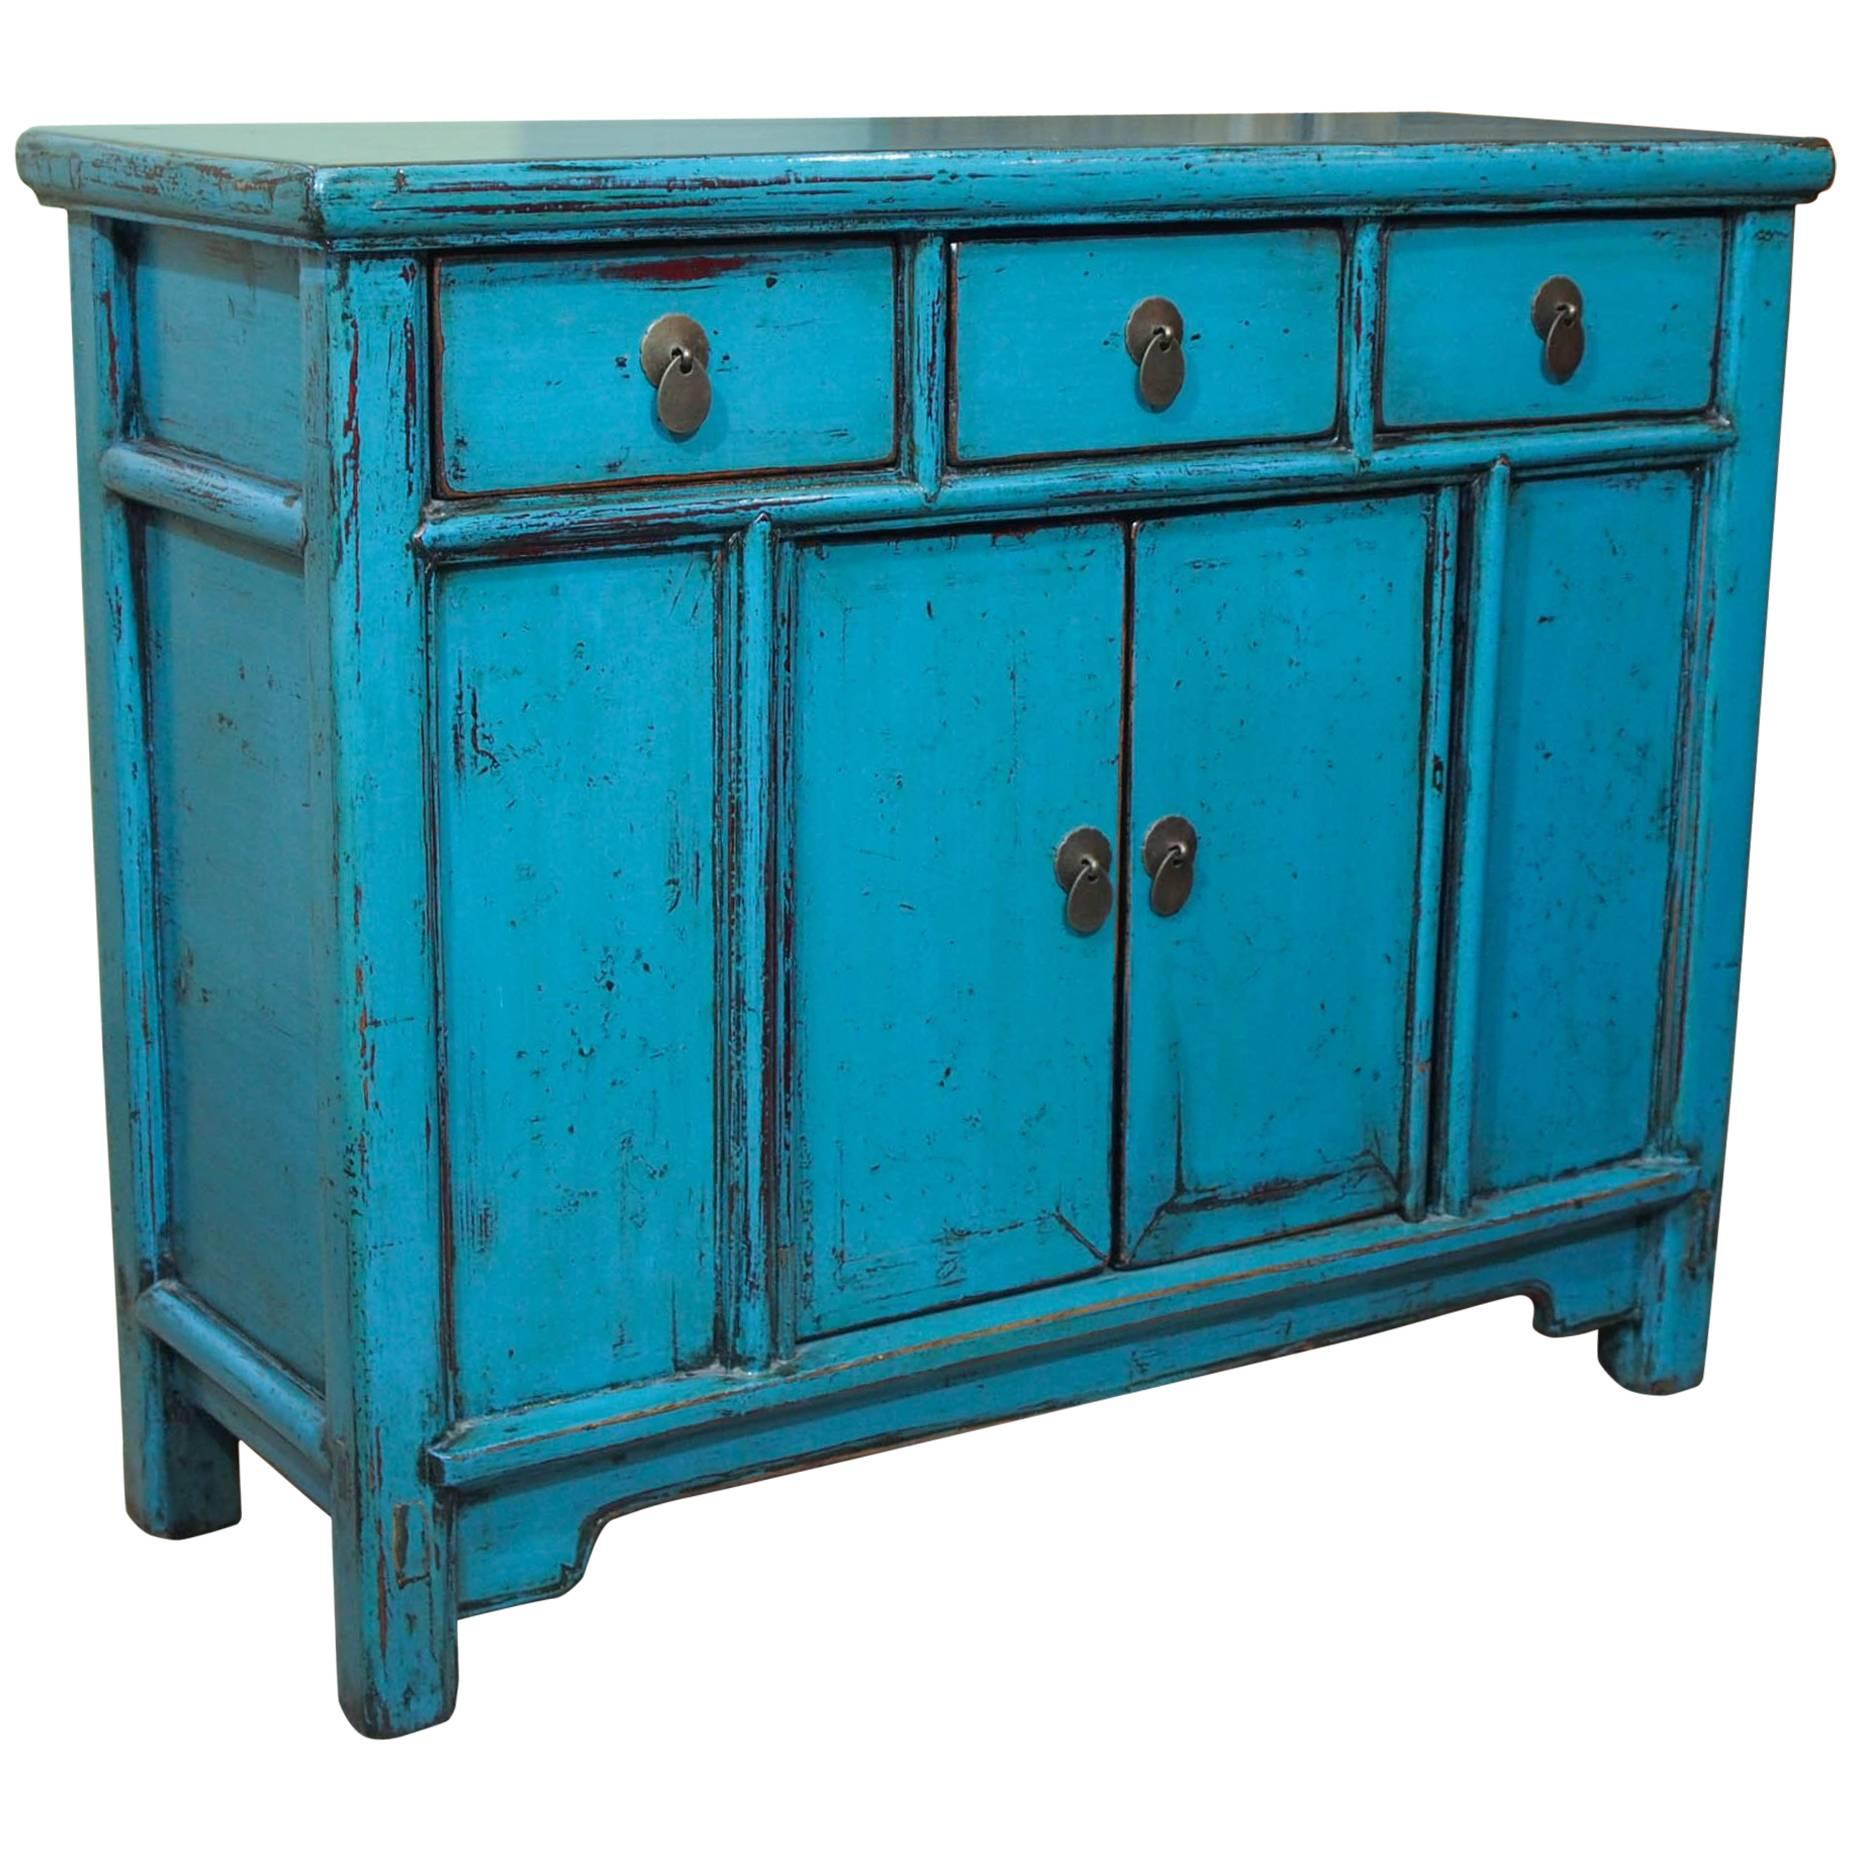 Antique Chinese Turquoise Lacquered Cabinet